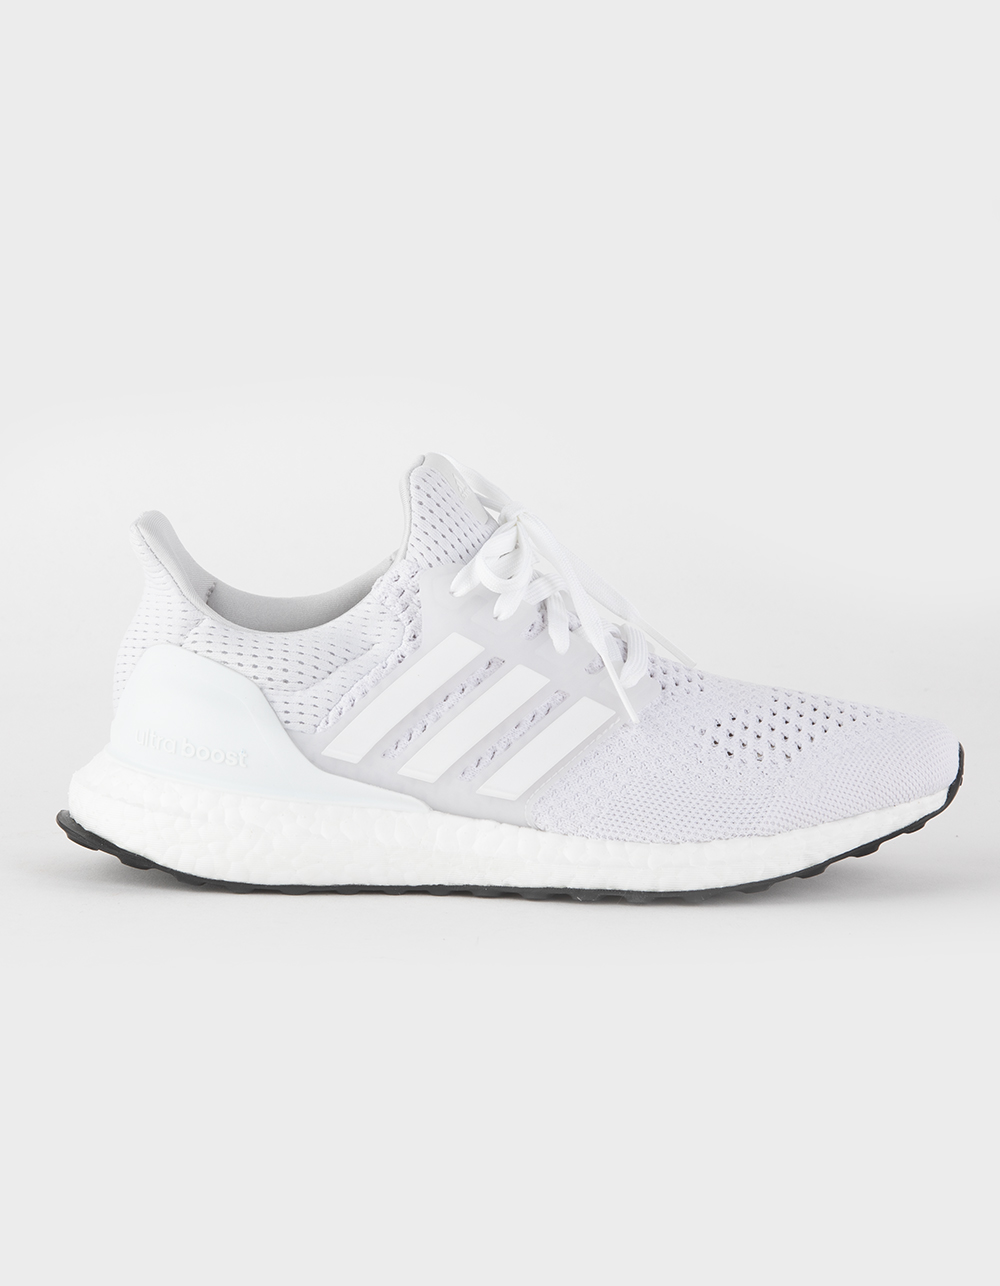 ADIDAS Ultraboost 1.0 Womens Shoes - WHITE | Tillys